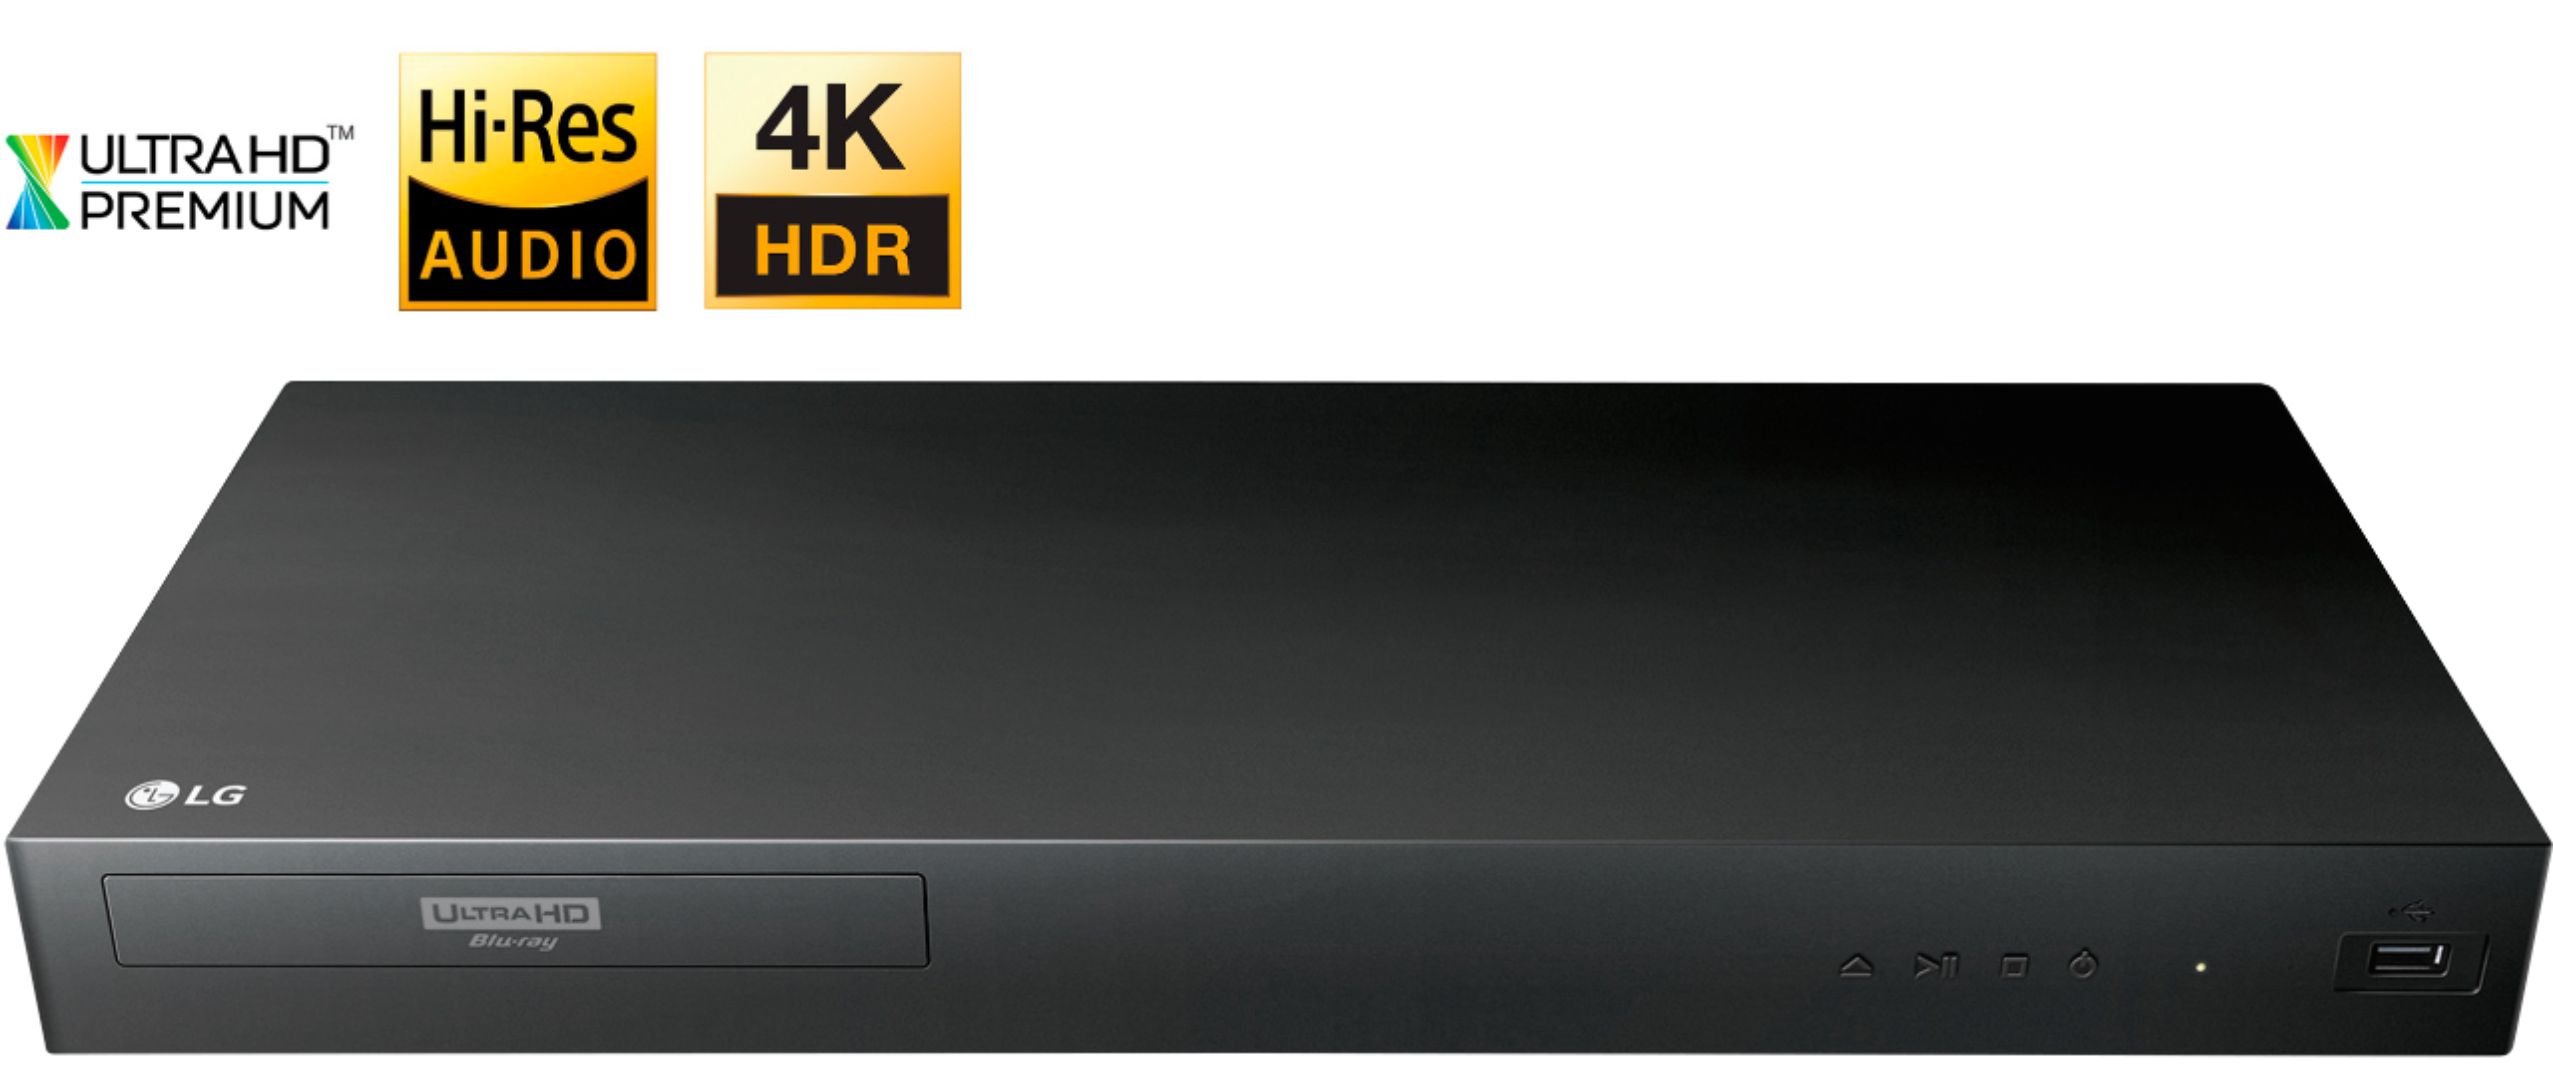 Descanso Contrapartida Culpa LG UP875 4K Ultra HD 3D Blu-ray Player Black UP875 - Best Buy